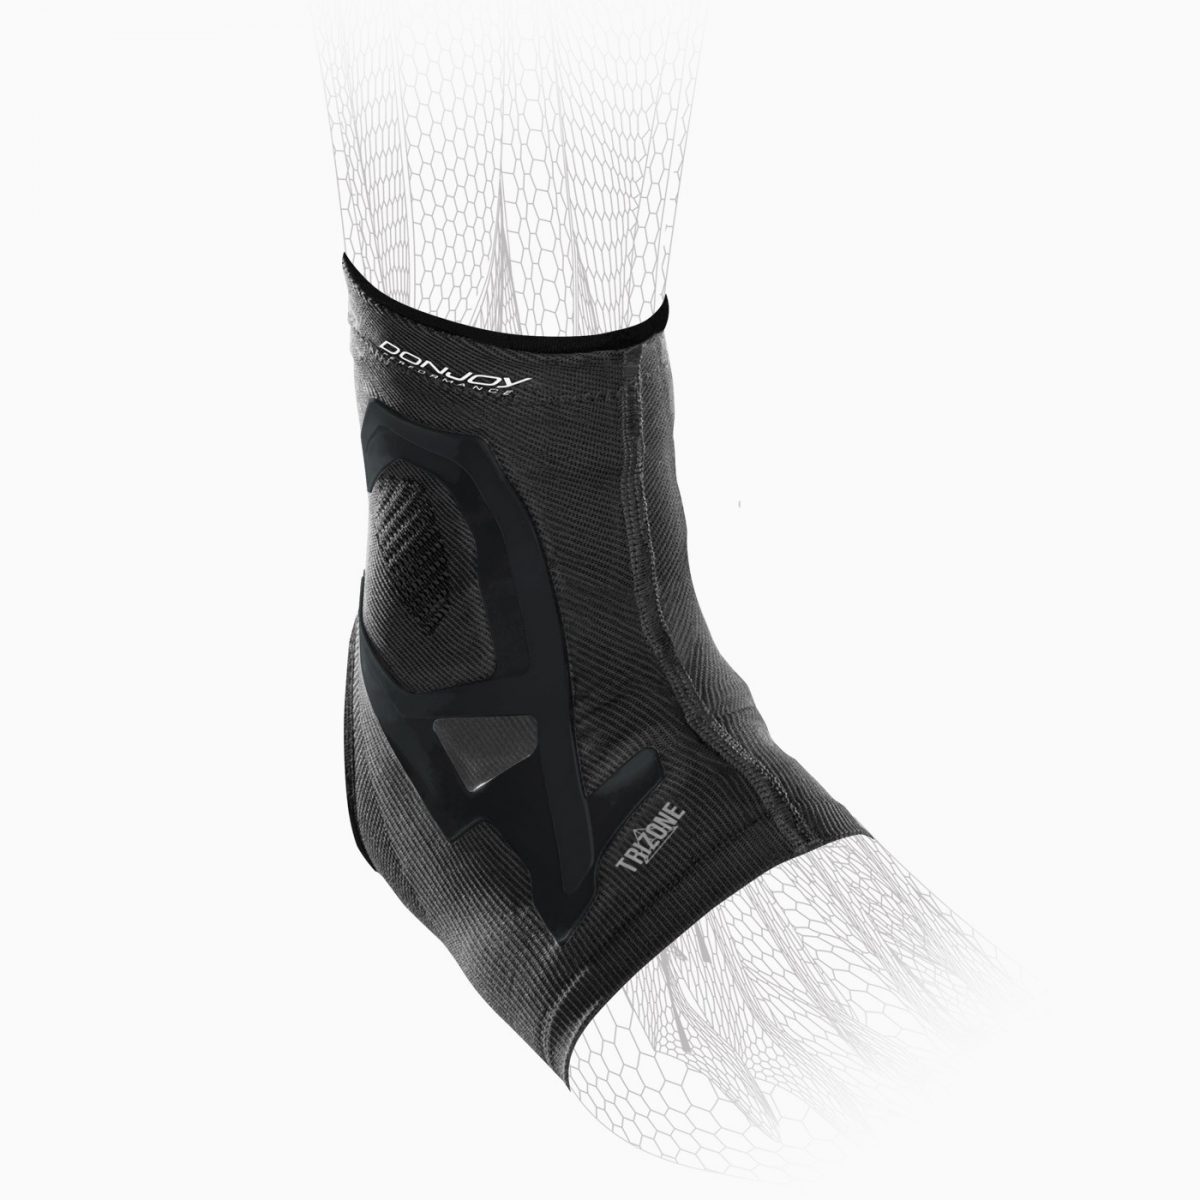 TriZone Ankle Support